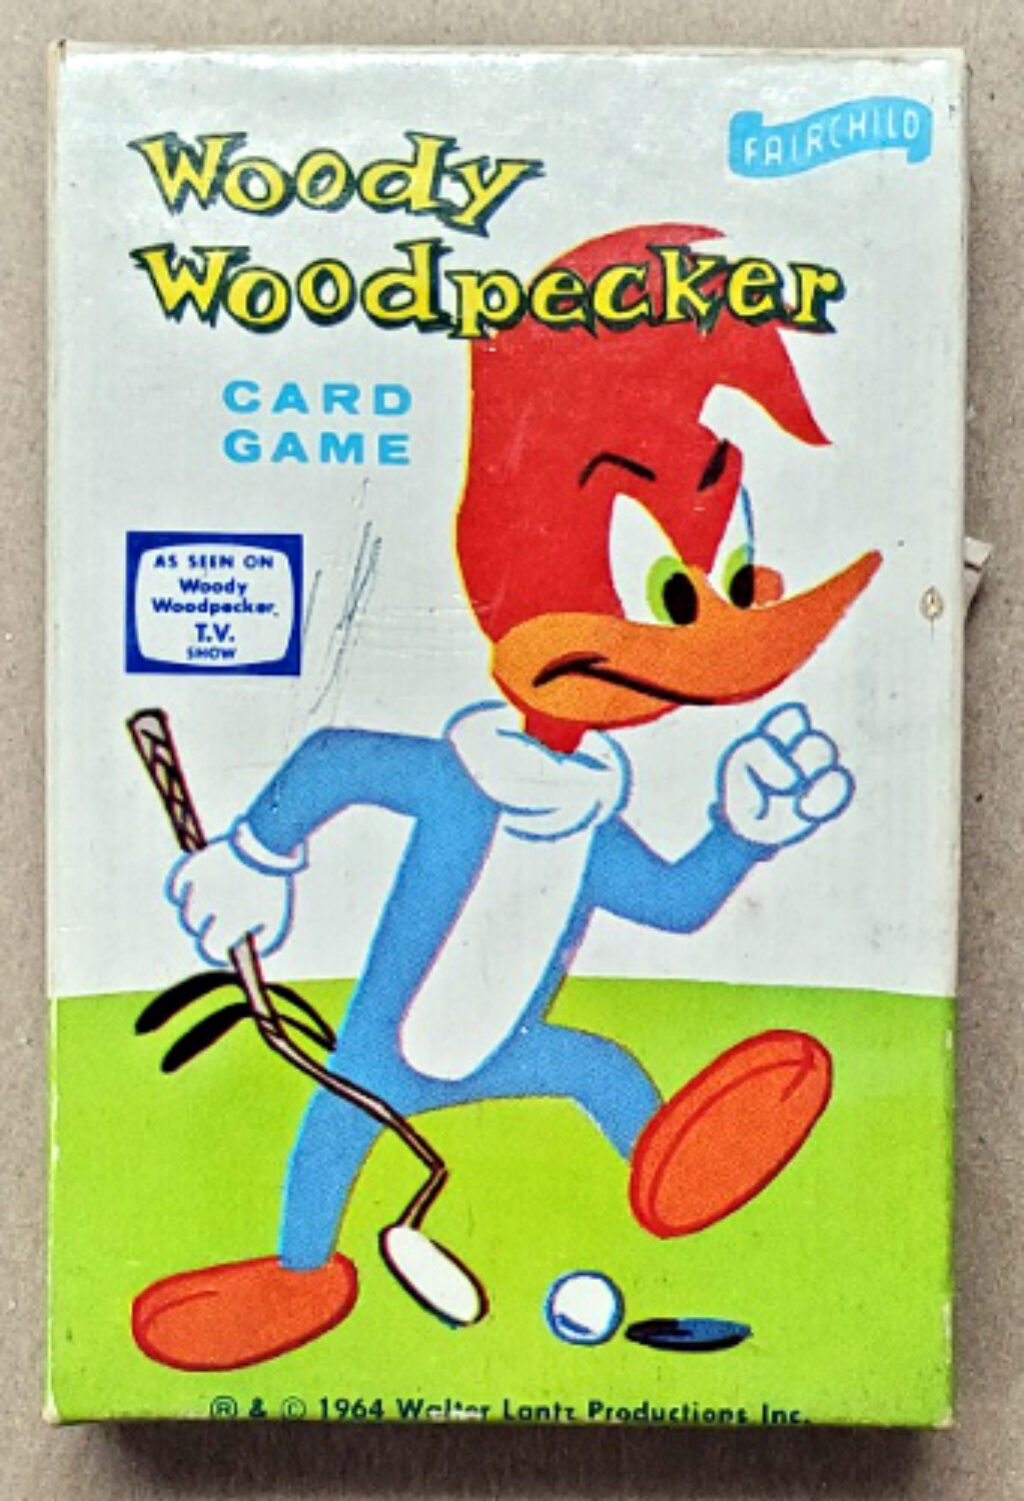 1964 Woody Woodpecker Card Game by Fairchild: Mint in the Box 1